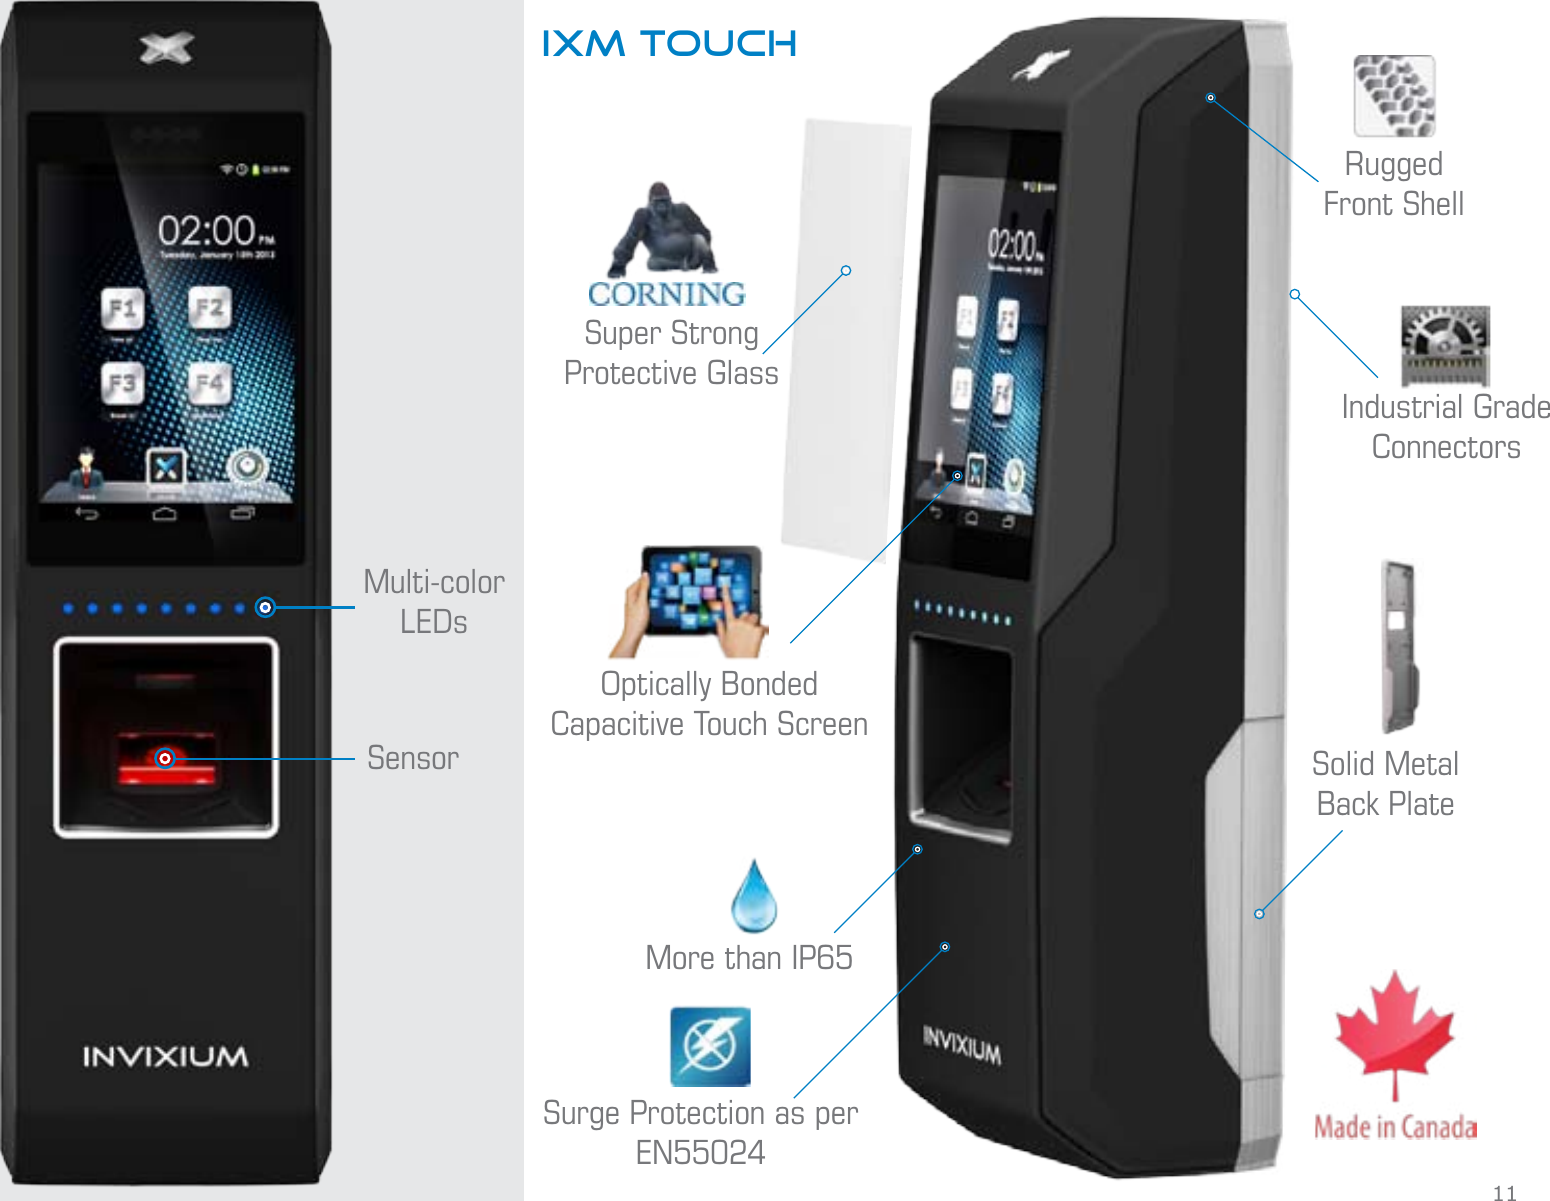 IXM TOUCH11Solid Metal Back PlateIndustrial Grade ConnectorsSurge Protection as per EN55024More than IP65Rugged Front ShellSuper Strong Protective GlassOptically Bonded Capacitive Touch ScreenSensorMulti-color LEDs